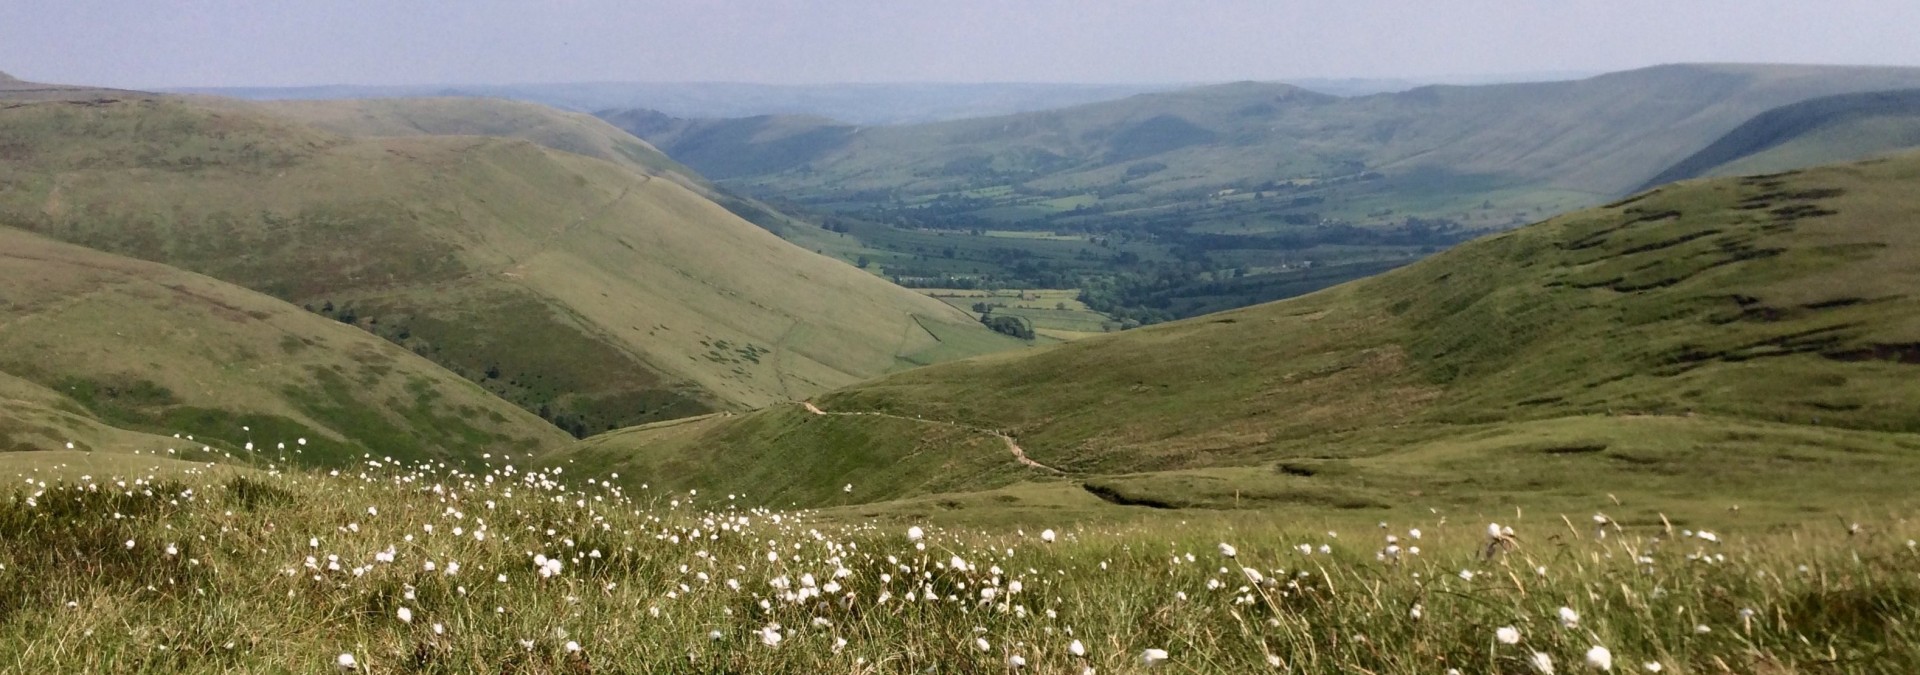 Edale Valley, The Peak District